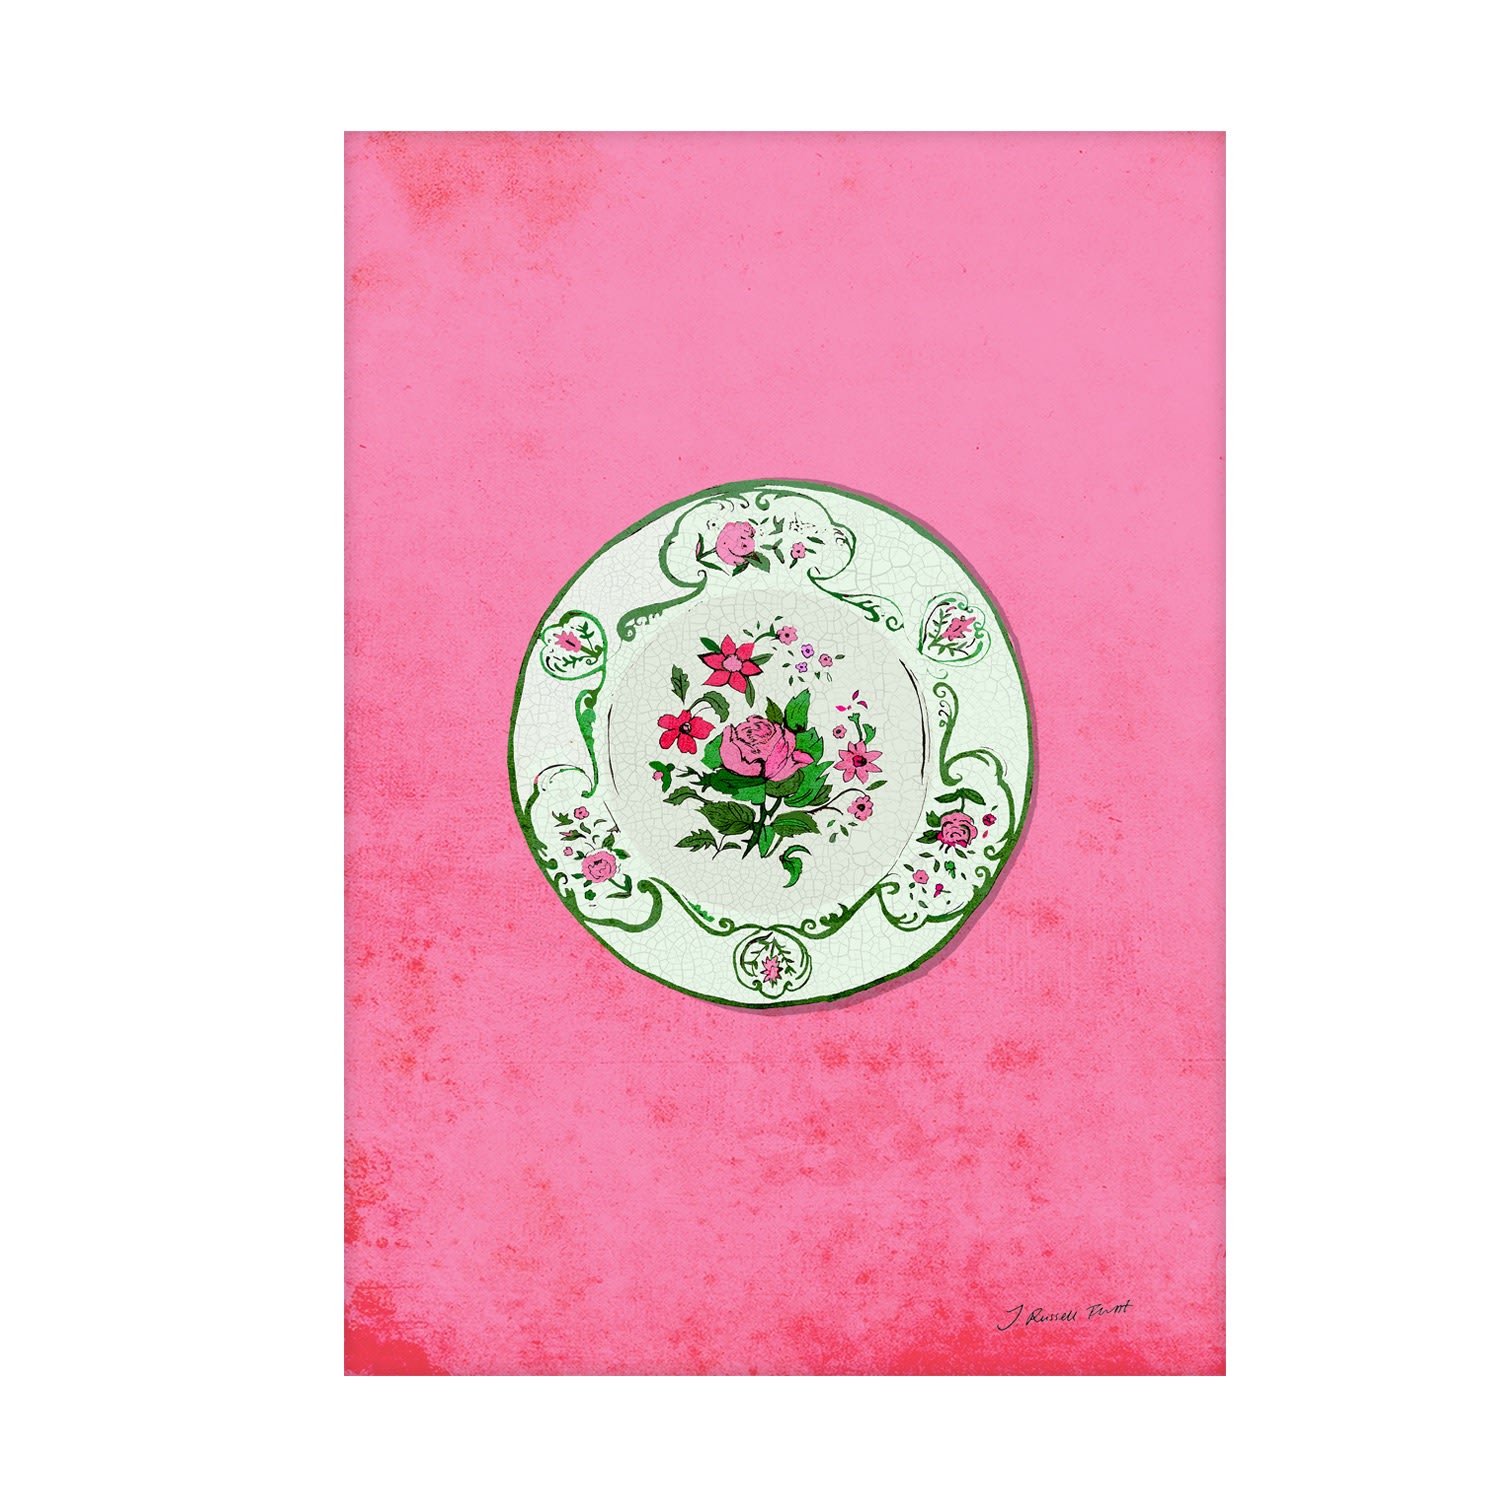 Pink / Purple The Rose Plate Signed Print A4 210 X 297Mm Jessica Russell Flint